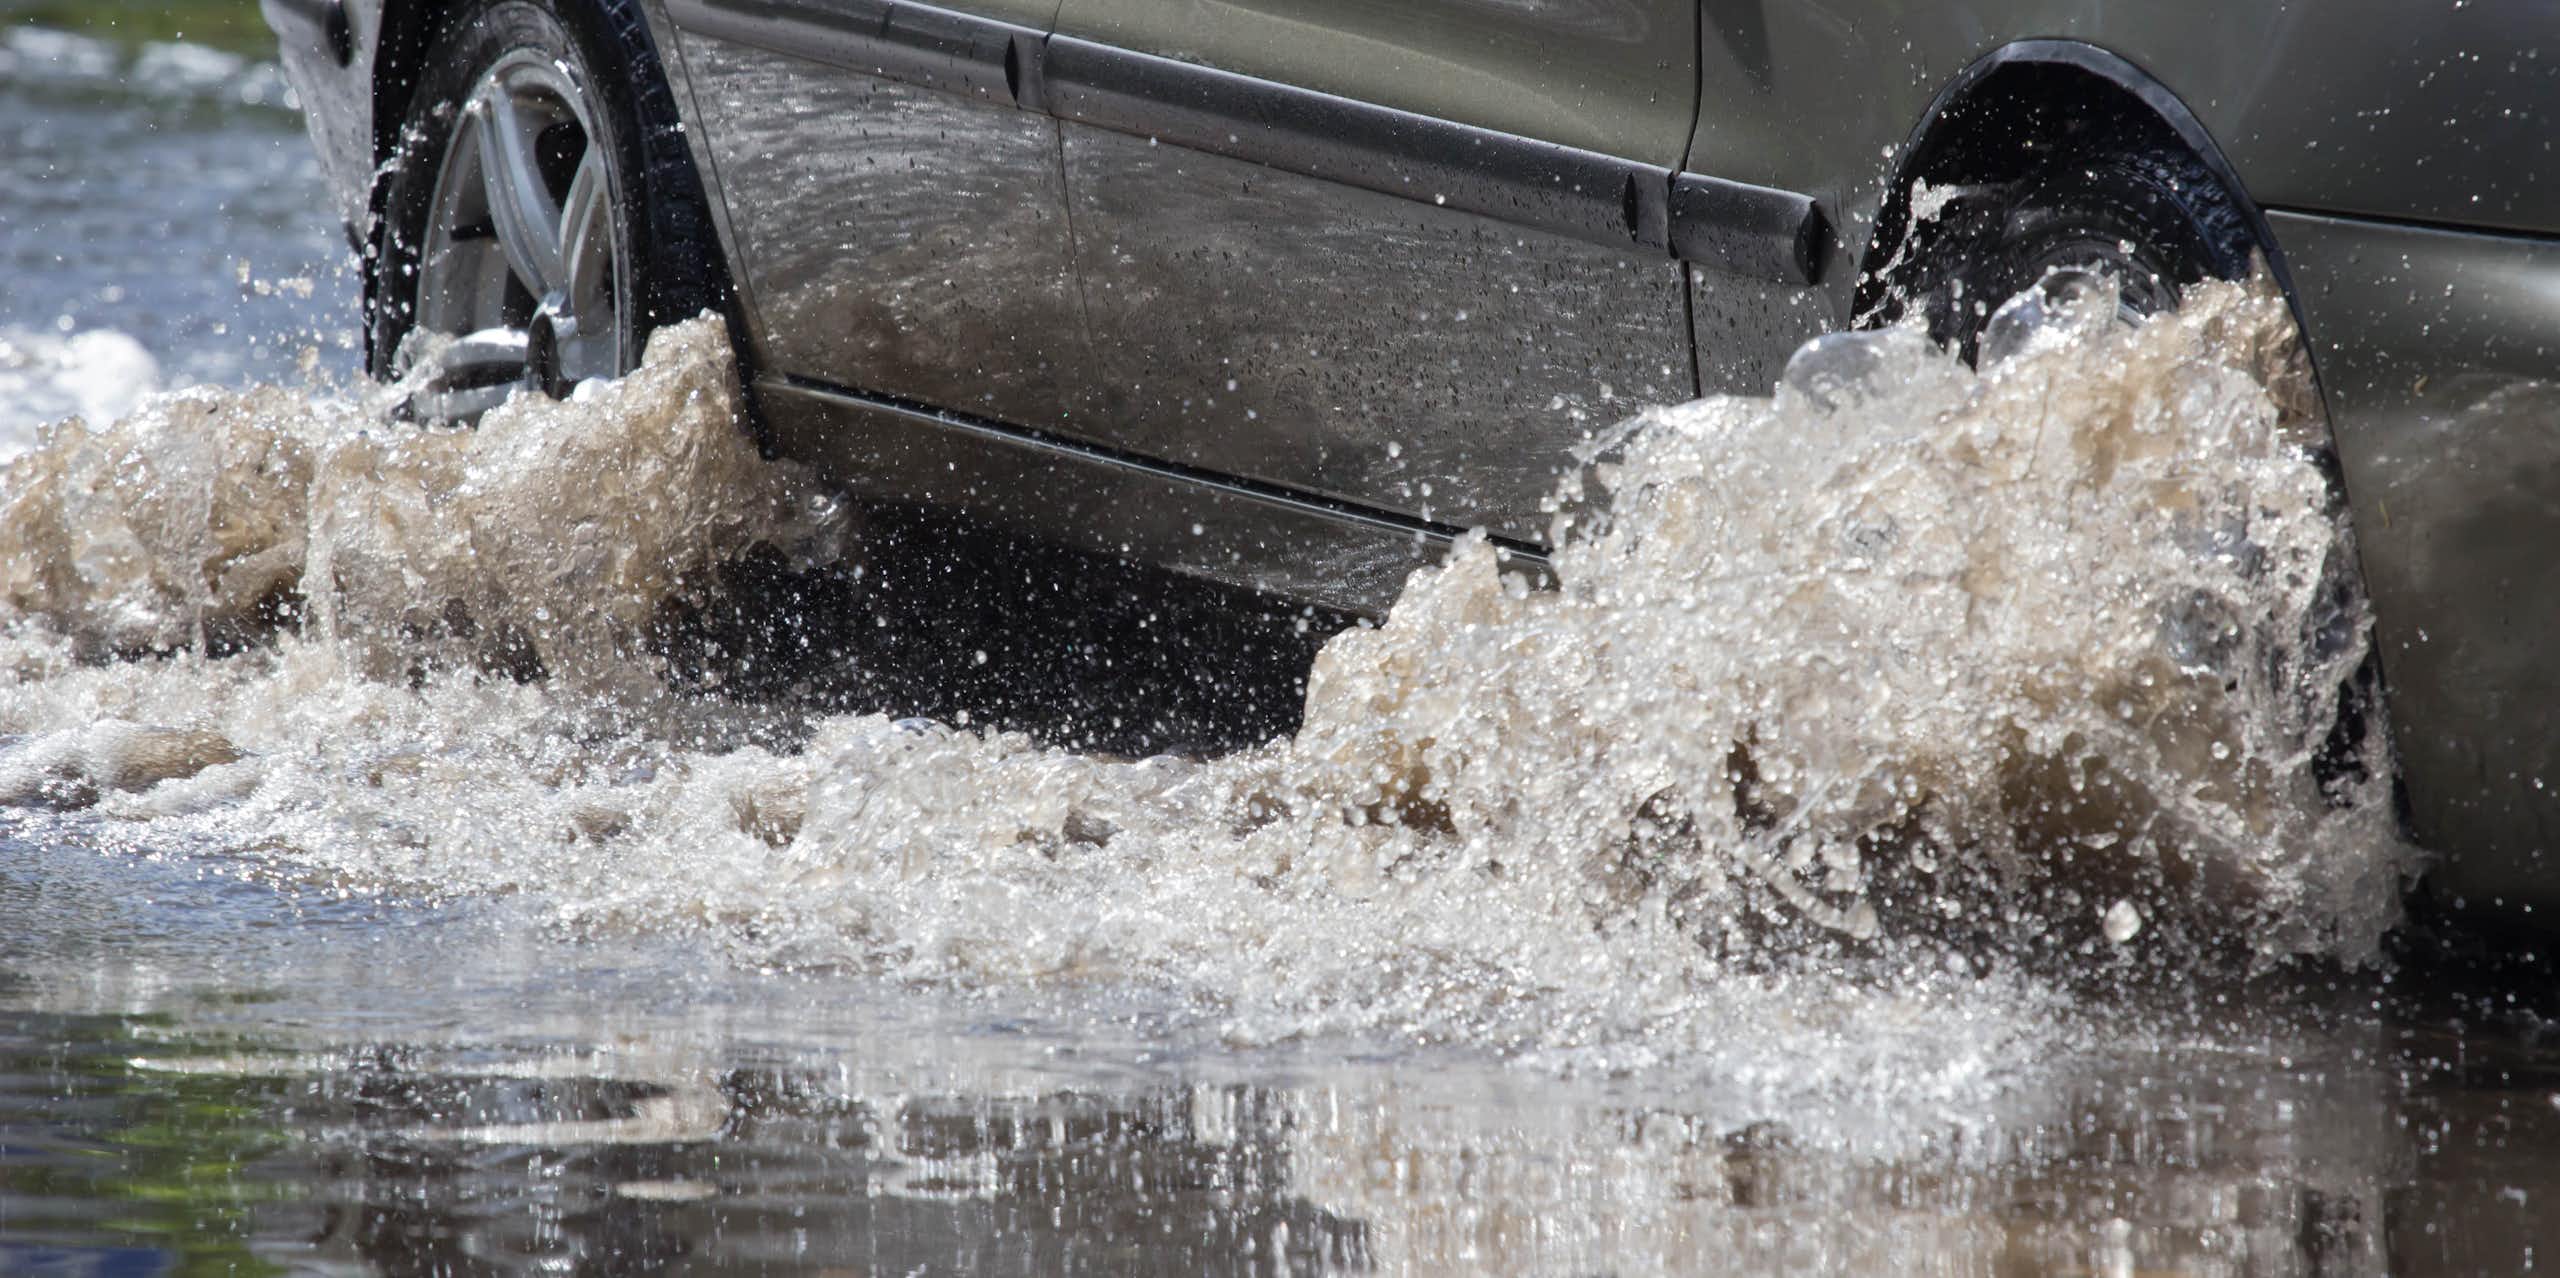 Closeup of a car driving on a flooded road, with shallow water churning around the wheel hubs 